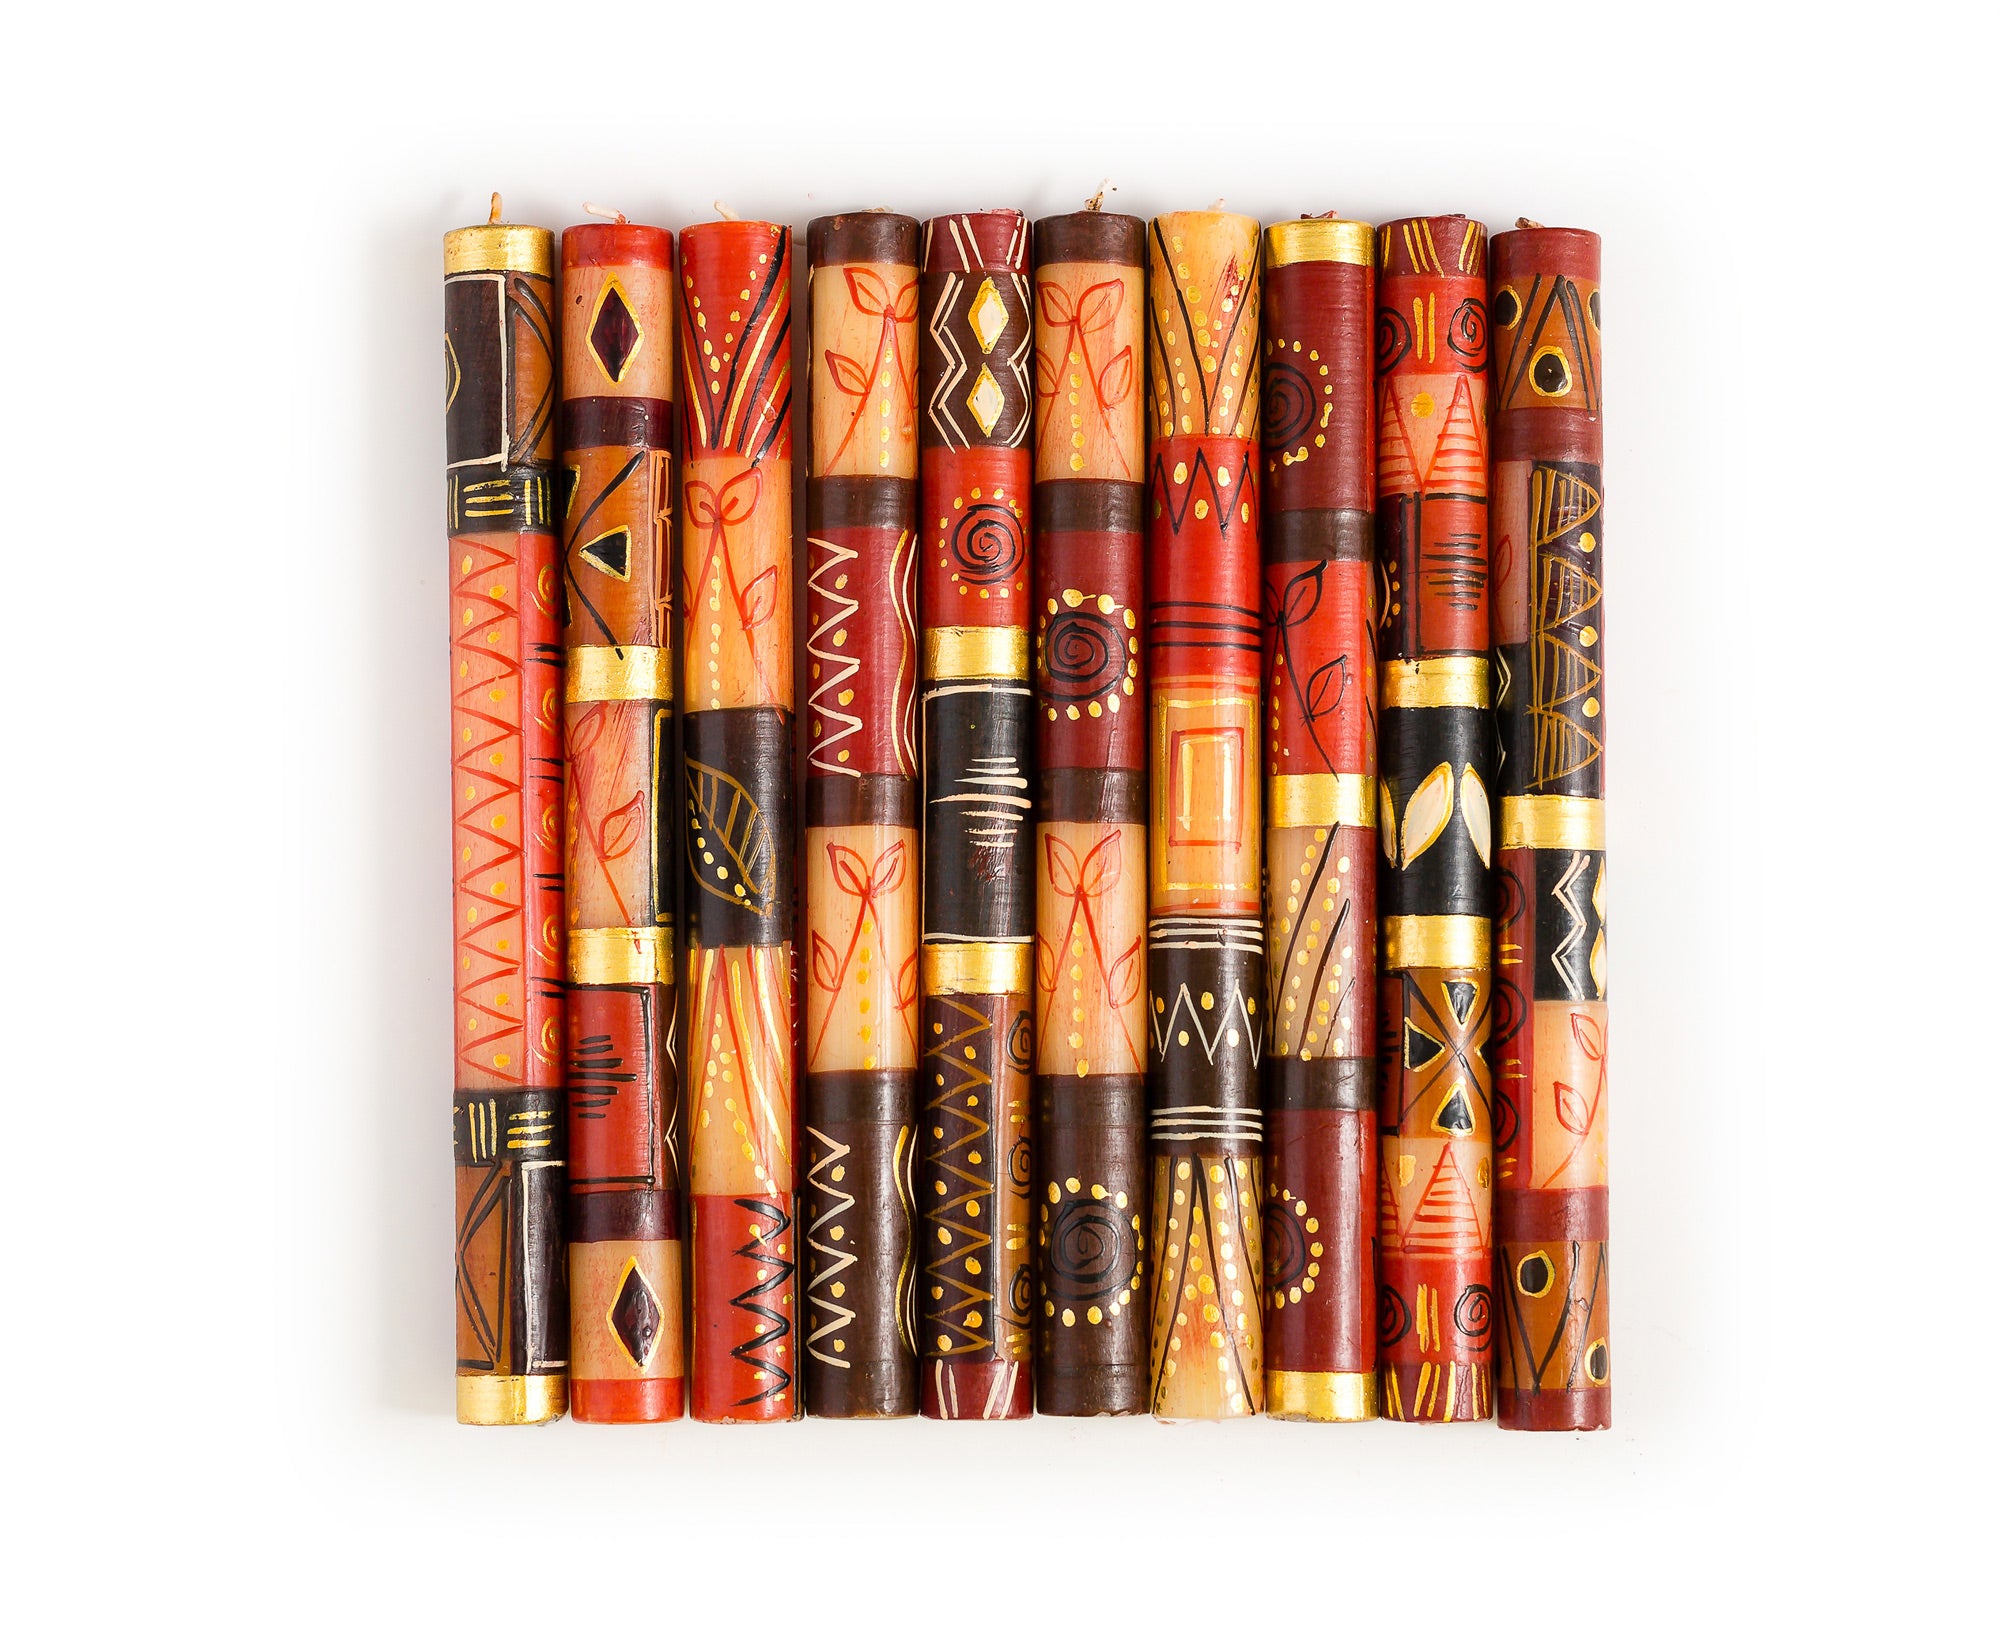 10 Safari Gold tapers that show the 10 designs of this collection. Warm tones of brown, rust and gold.